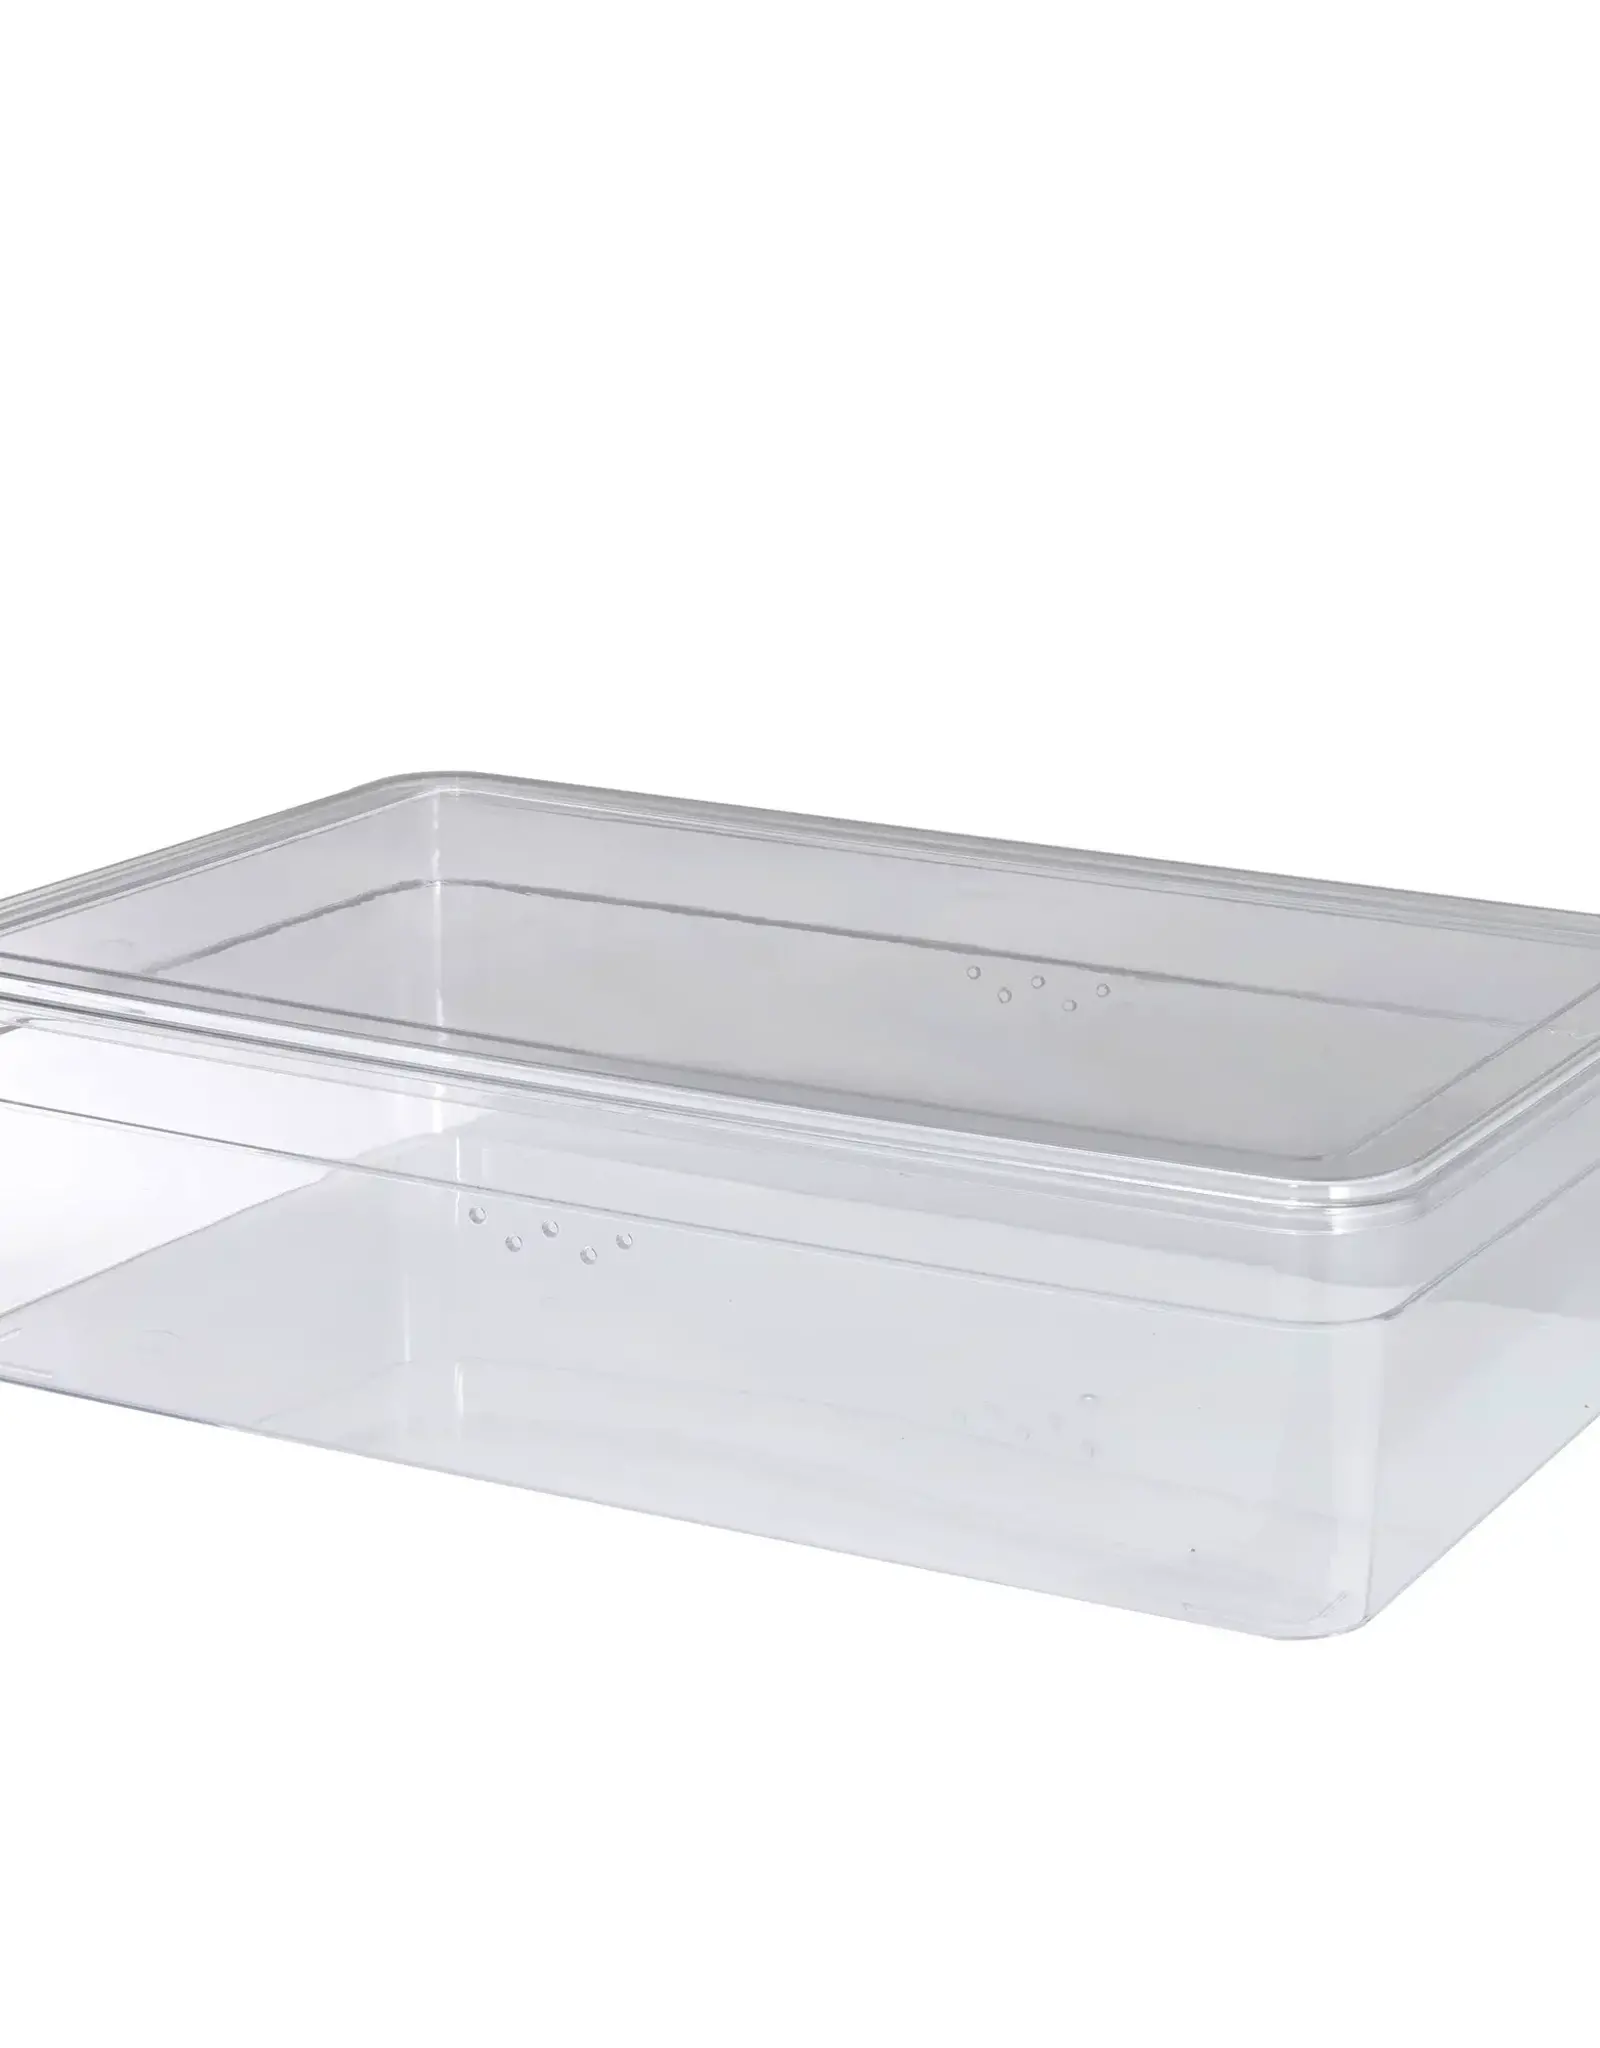 ENCLOSURE- ACRYLIC- BOX- HABITAT- 14.75in W x 22.5in D x 6in H- EXTRA LONG- EXTRA LARGE